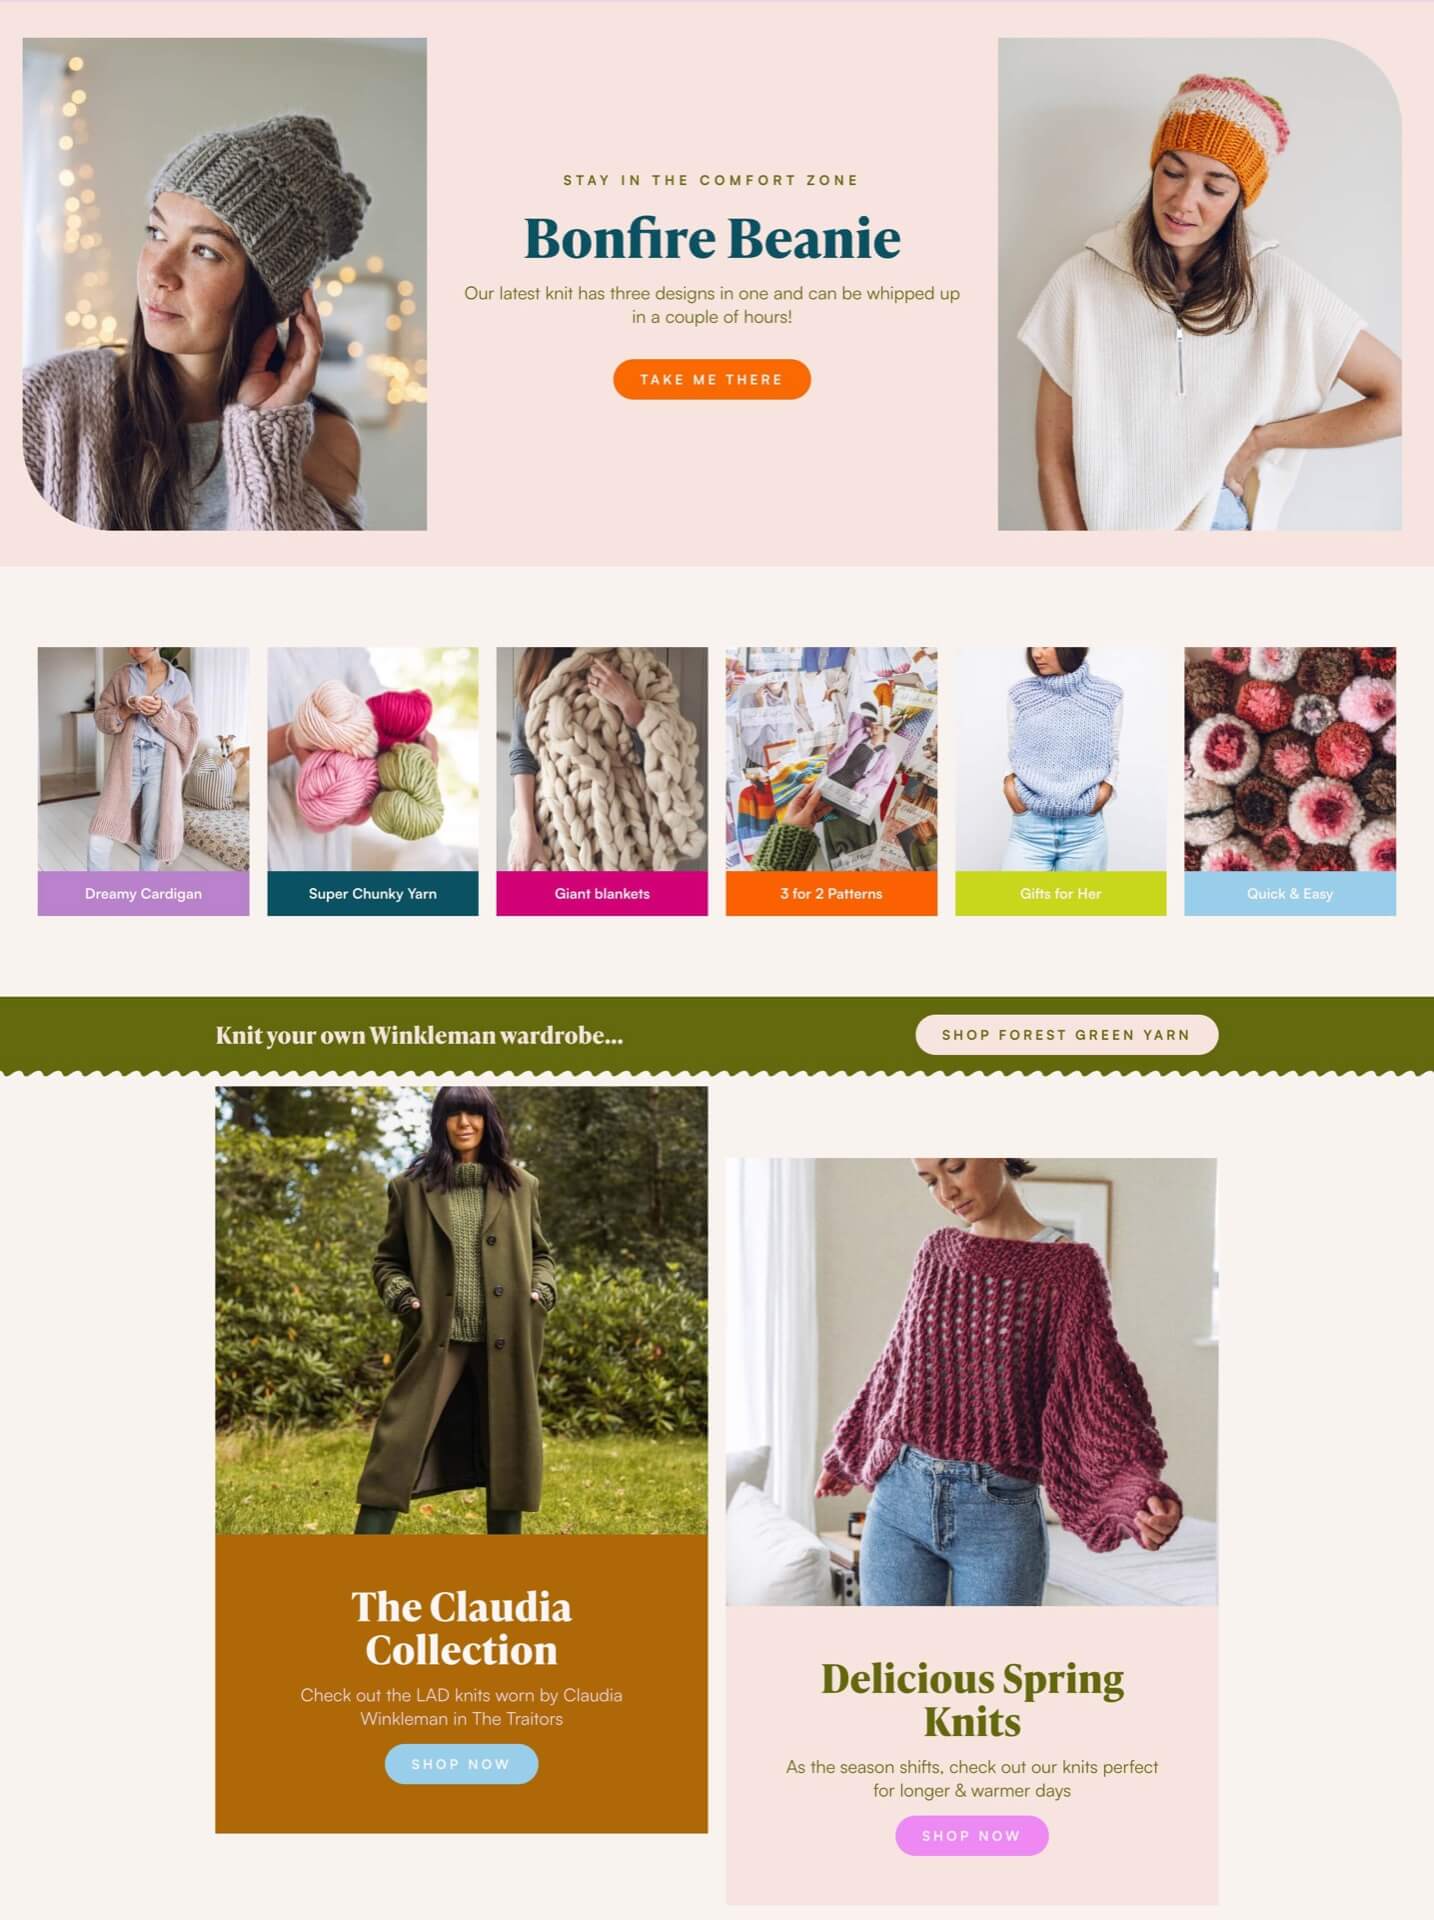 Screen capture of the Lauren Aston Designs website showing home page sections